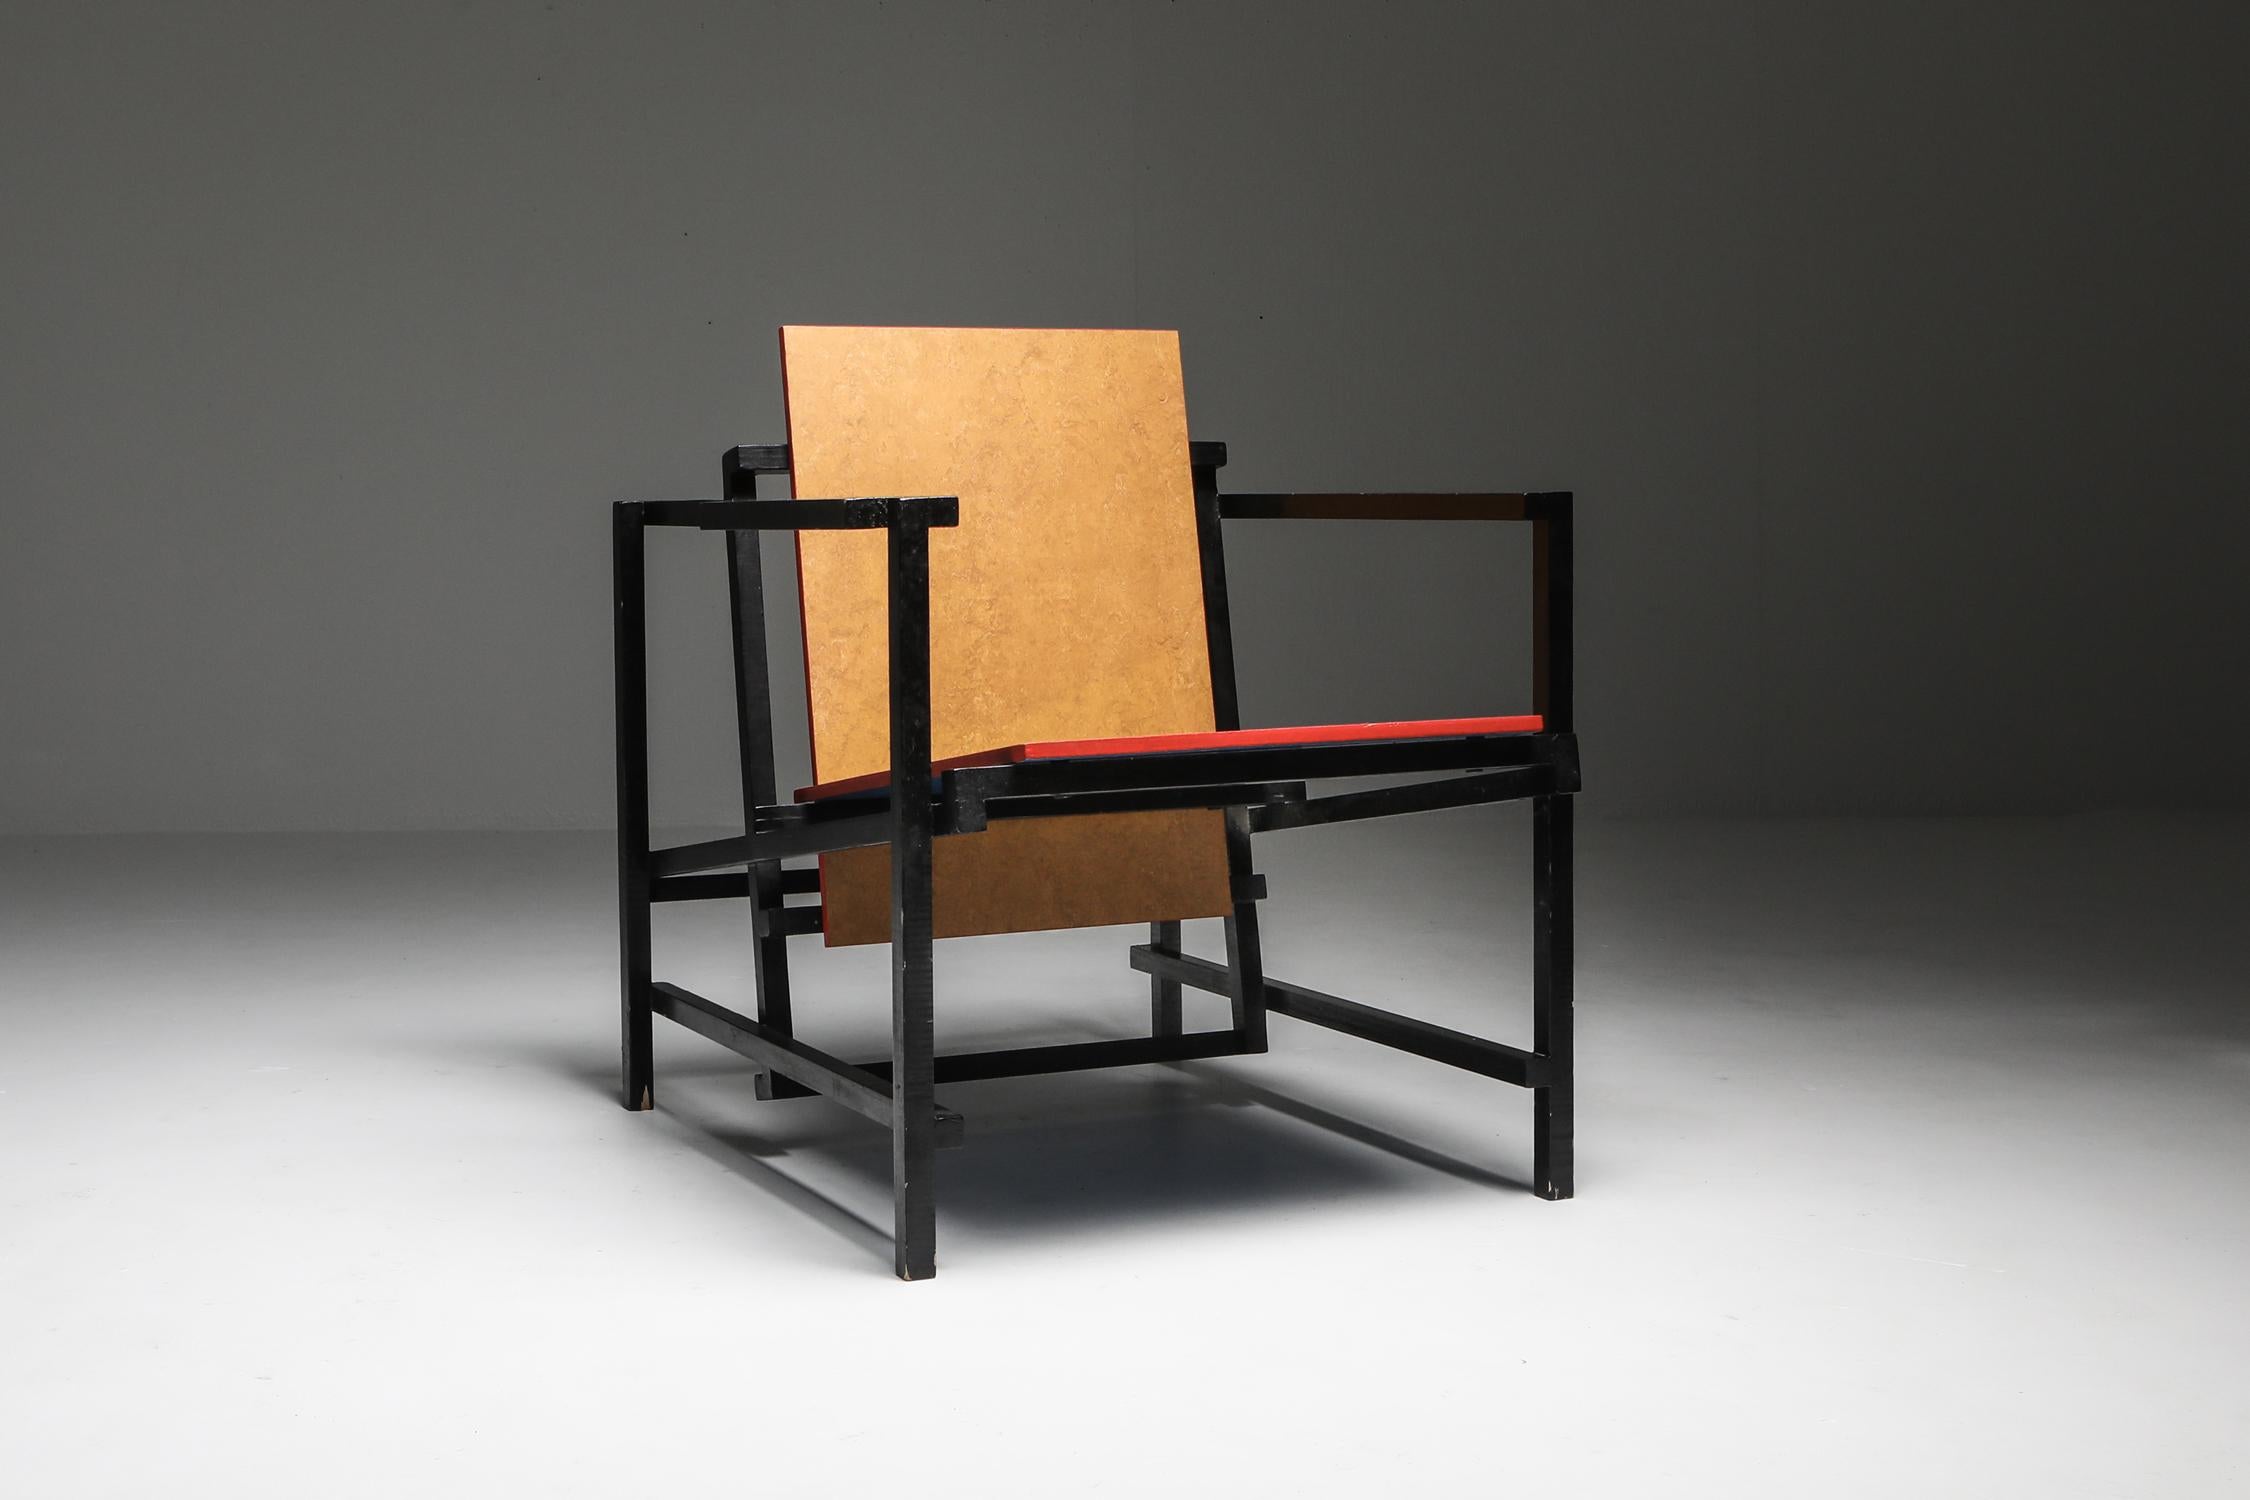 Rietveld style modernist armchair, Dutch, 1970s

Designer study and interpretation of Gerrit Rietveld's famous red and blue chair.
Love these unusual vintage hommage pieces.
 